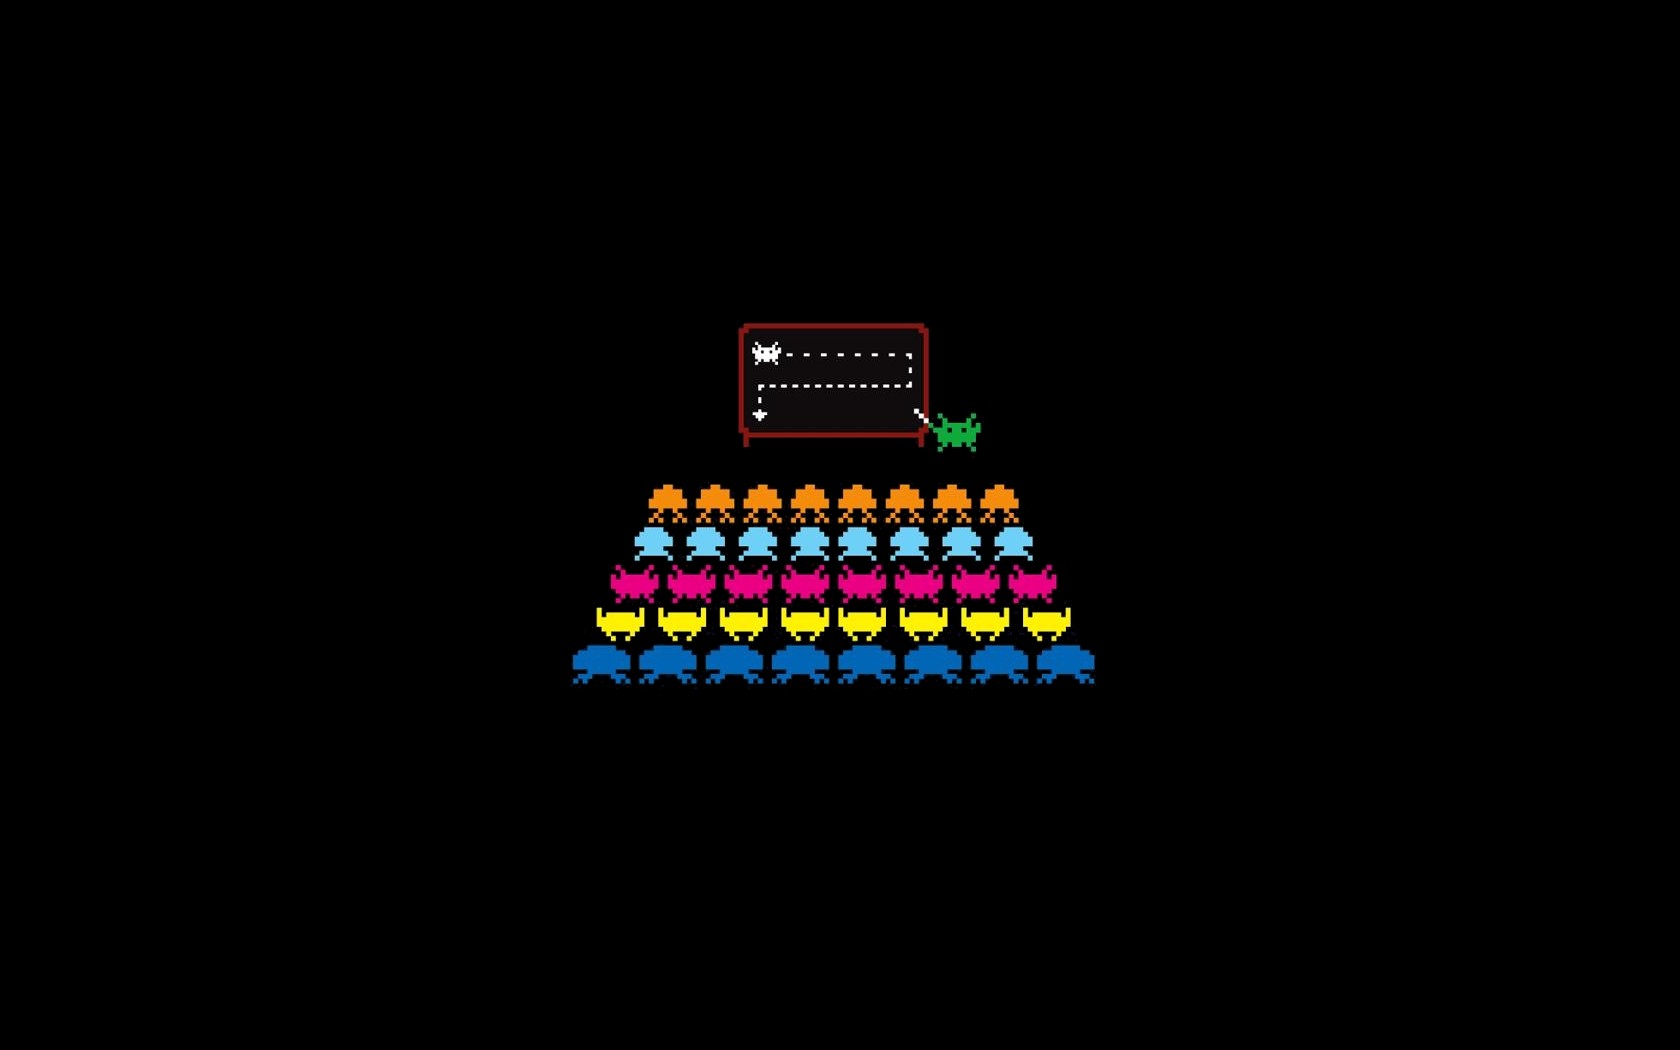 General 1680x1050 retro games humor video games Space Invaders video game art colorful simple background black background